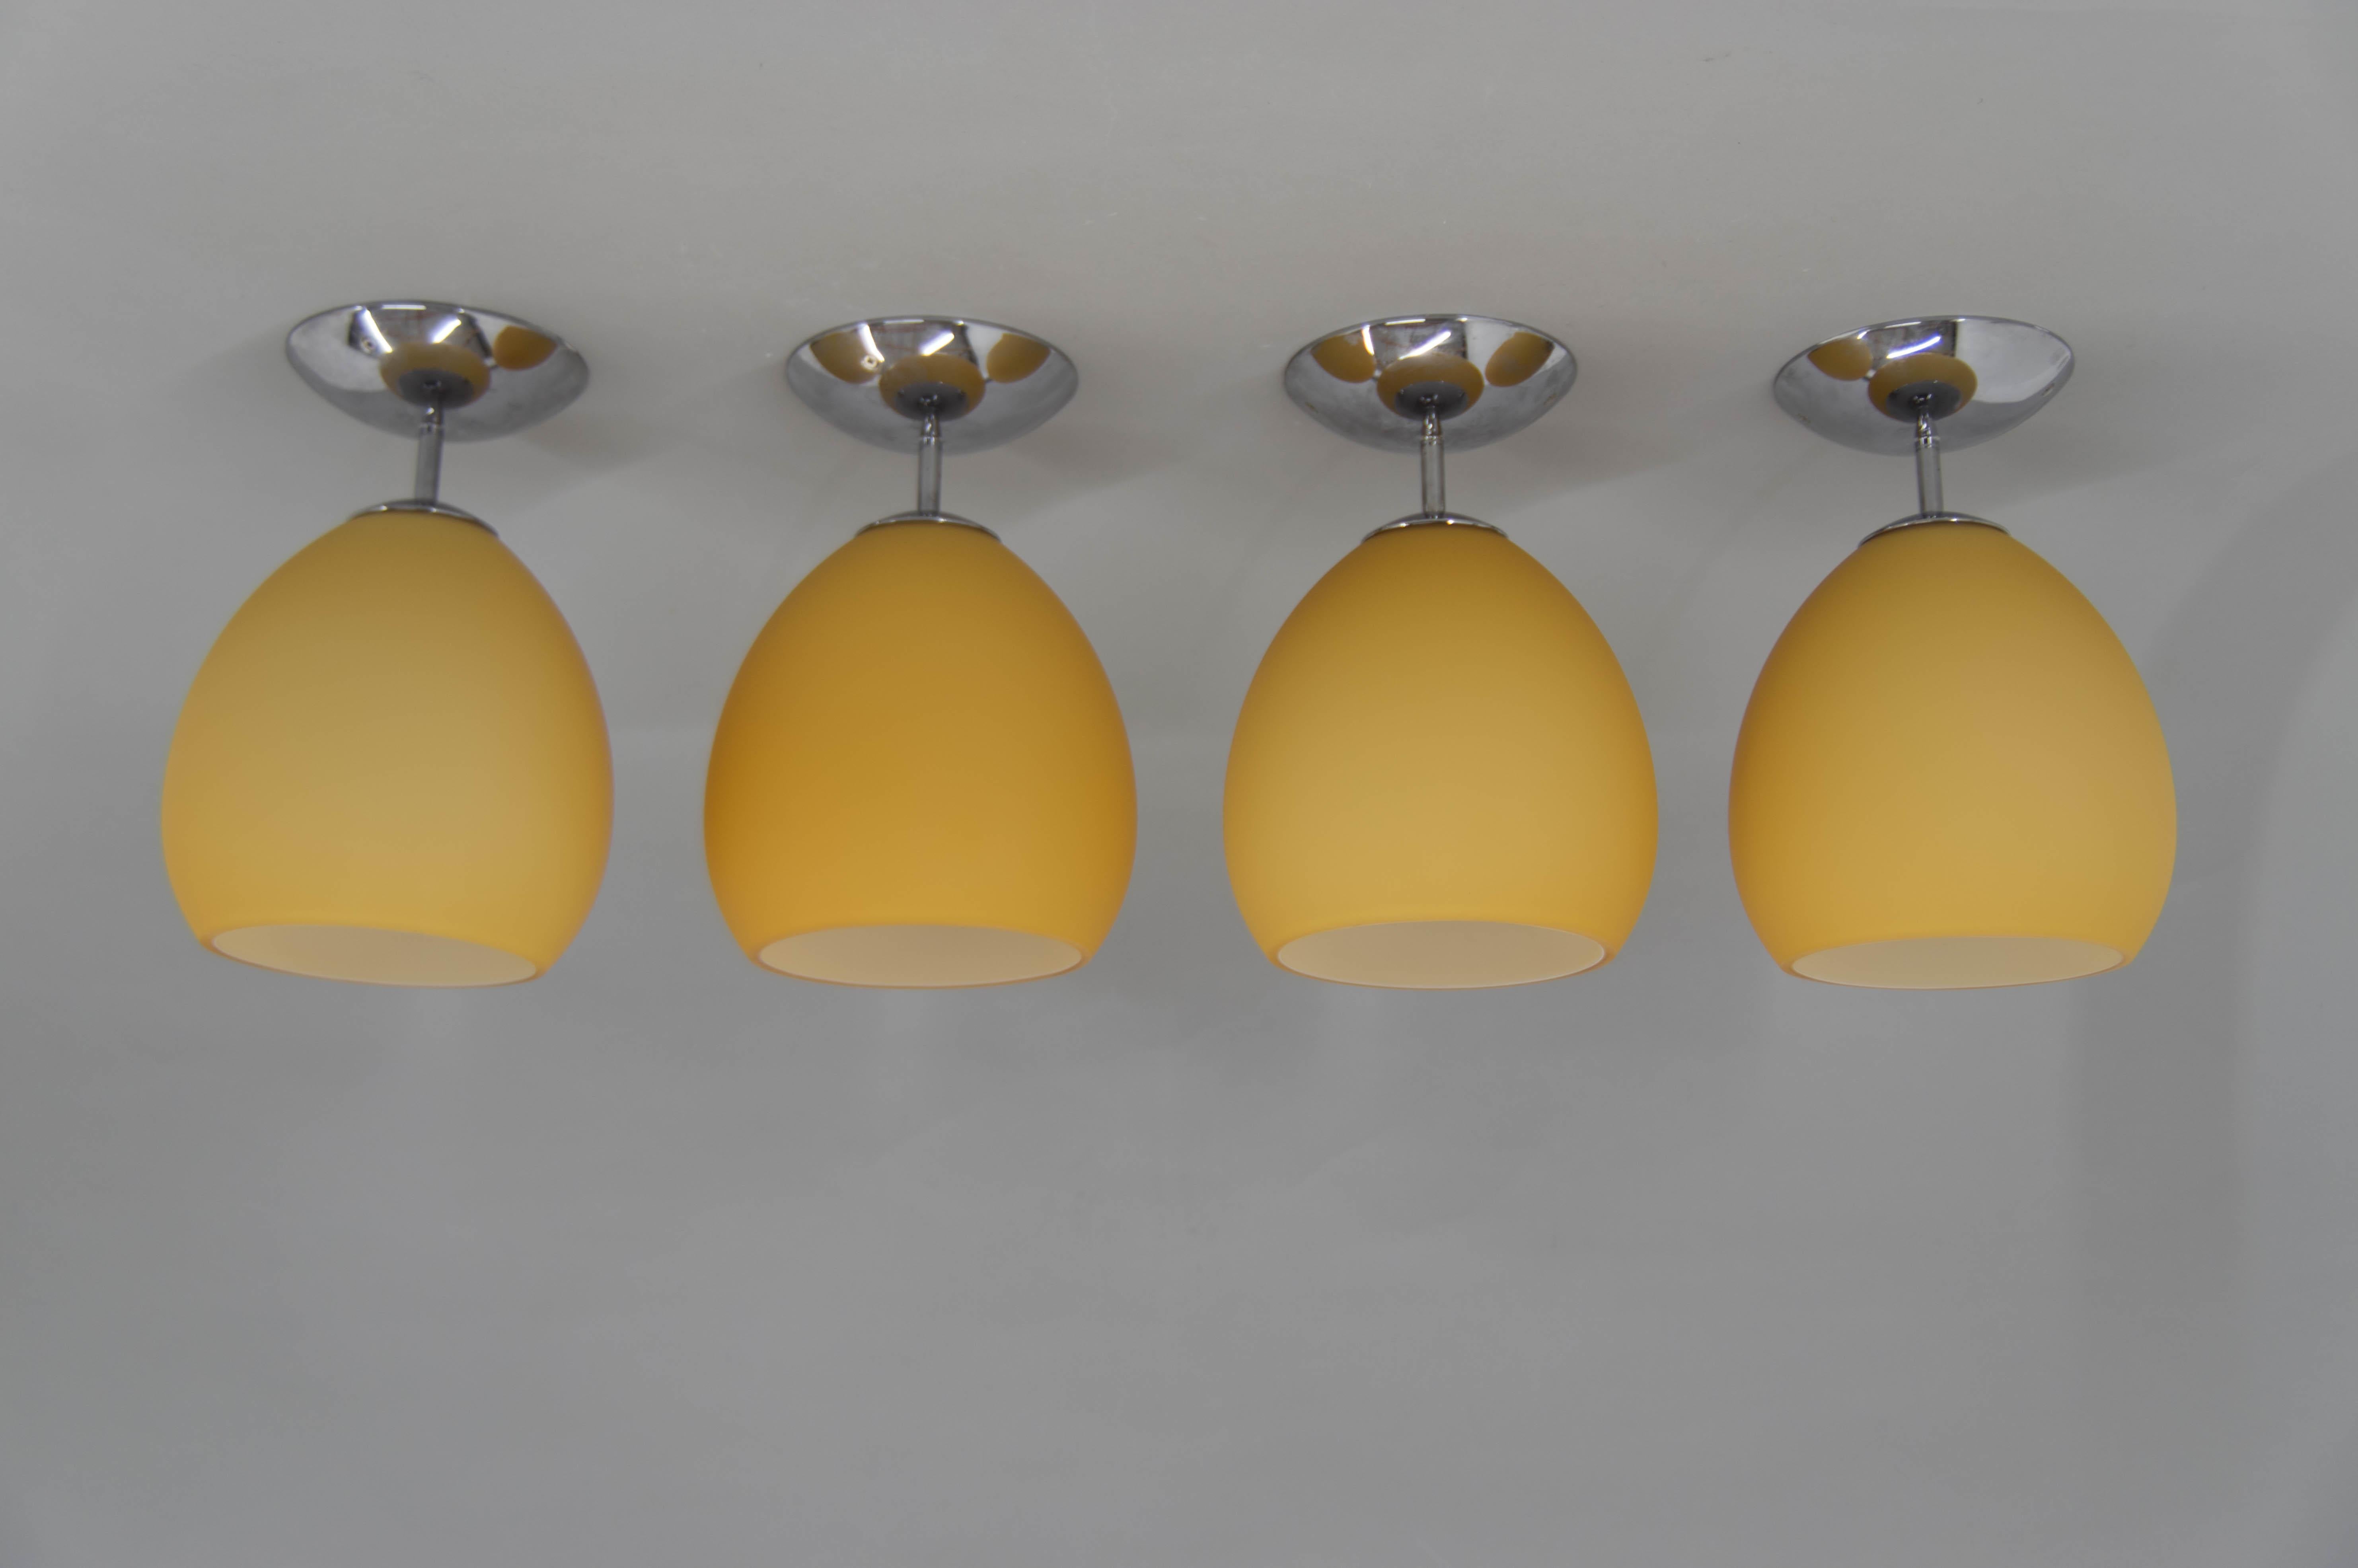 Set of four yellow Golf PL lfush mounts by Leucos designed by Toso & Massari in 1990s.
Murano glass with satin finish.
Set is in perfect condition
E25-E27 bulb
US wiring compatible